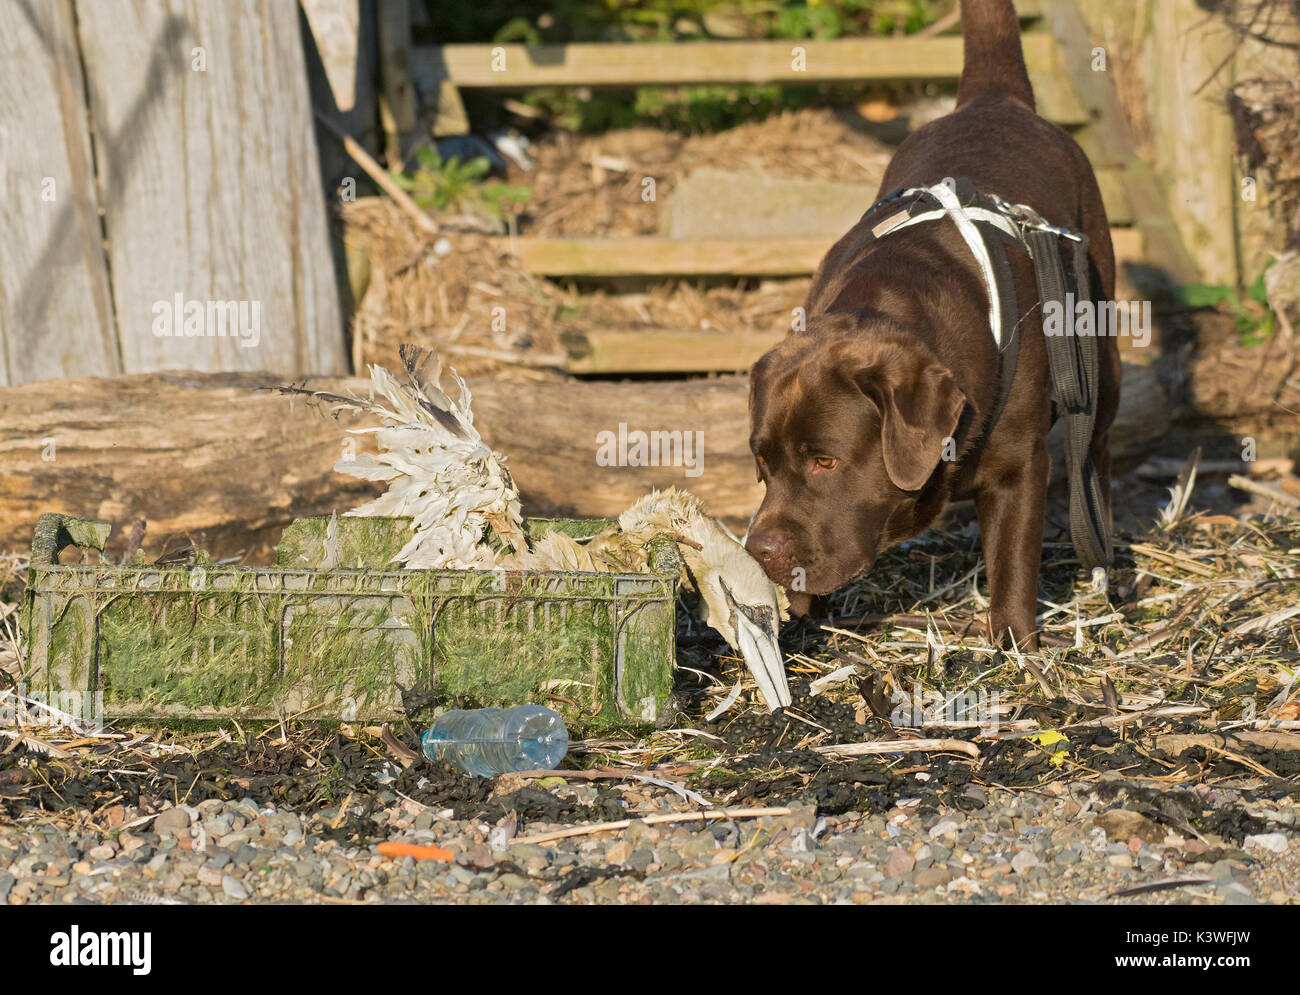 Dog inspecting a dead Gannet, Morus bassanus, washed up on beach in plastic crate, Lancashire, UK Stock Photo